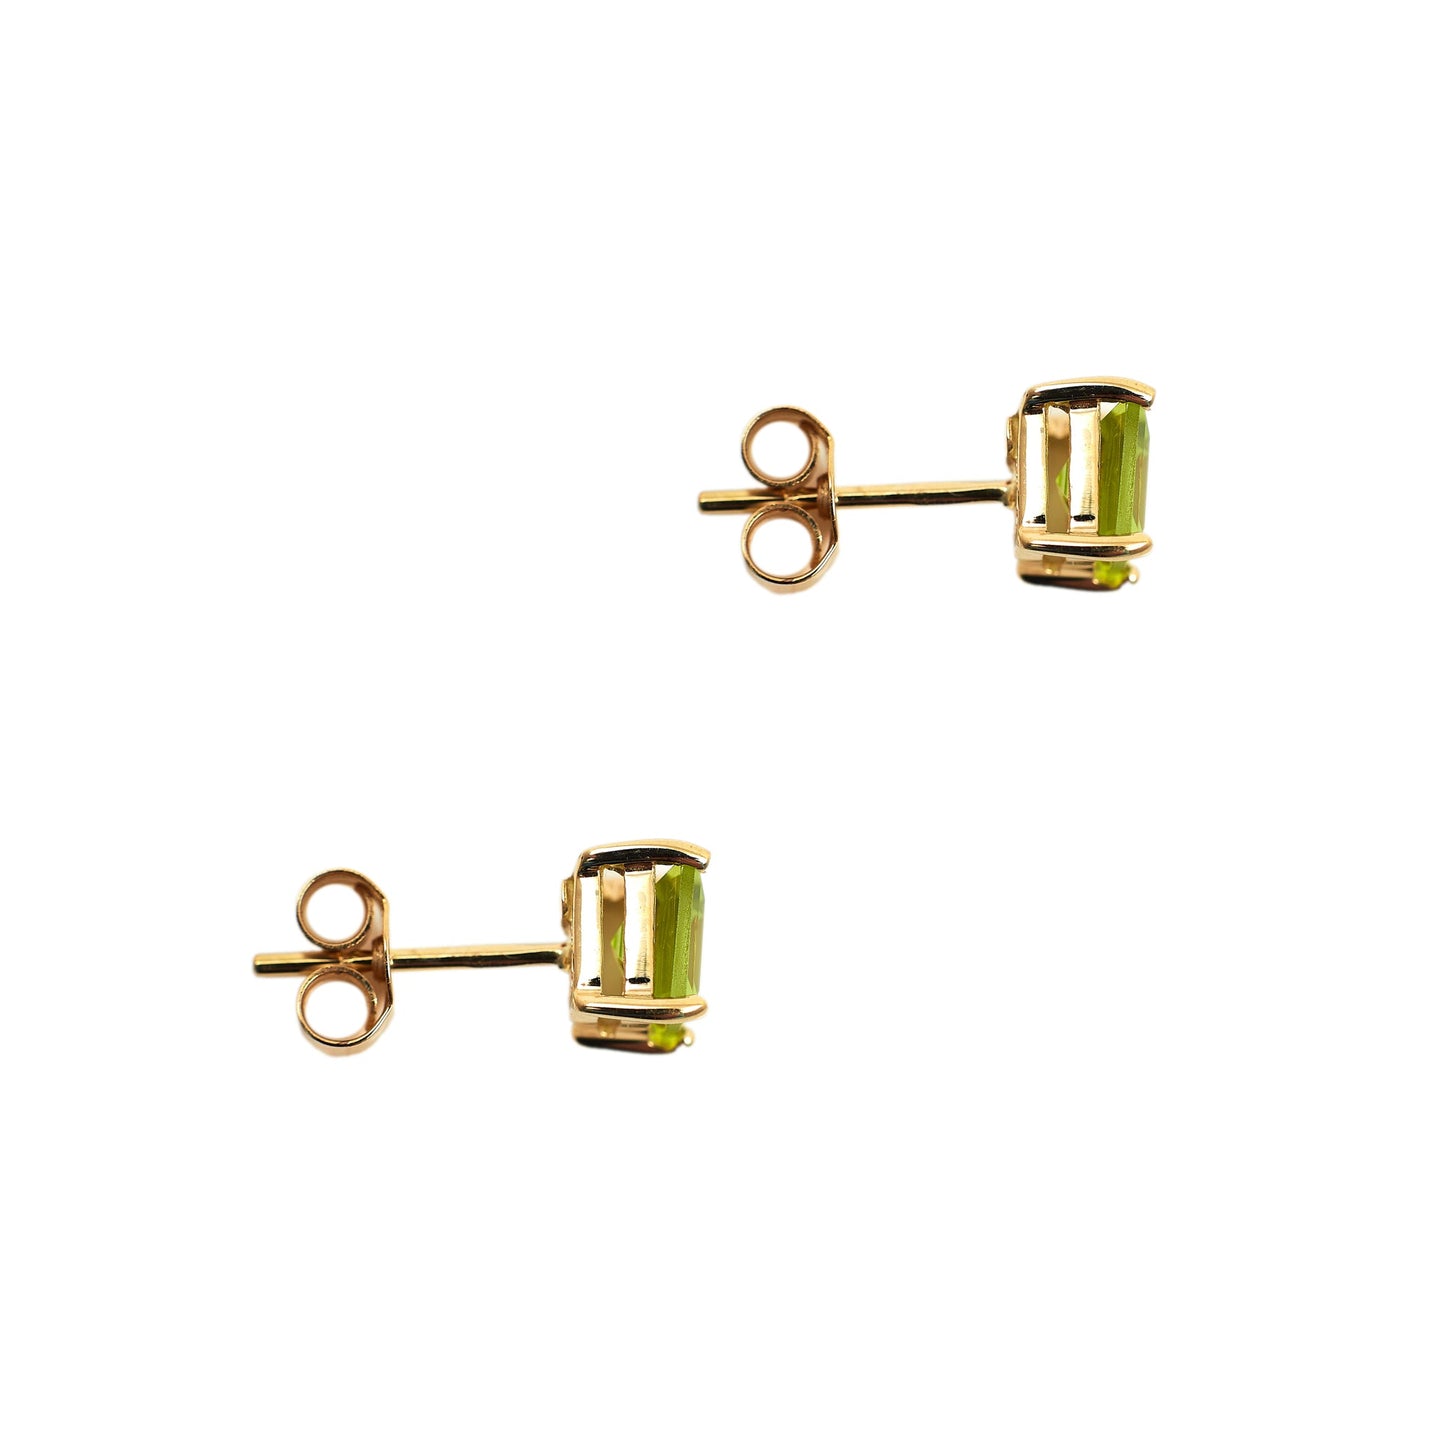 Pre-Owned 9ct Yellow Gold Square Peridot Stud Earrings